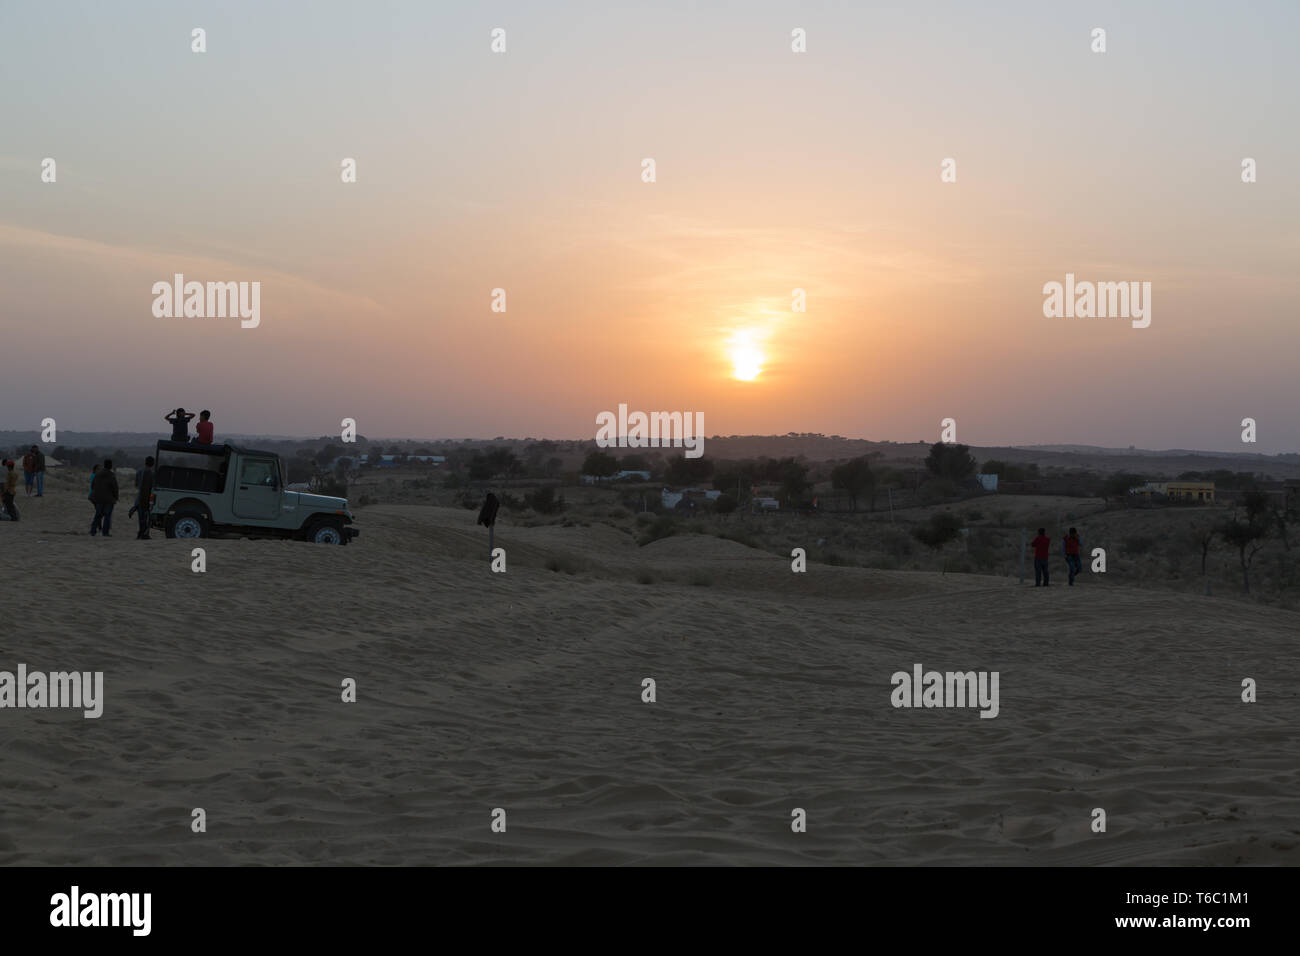 Desert Sunset with peaople silhouette and jeep in Rajasthan India Stock Photo